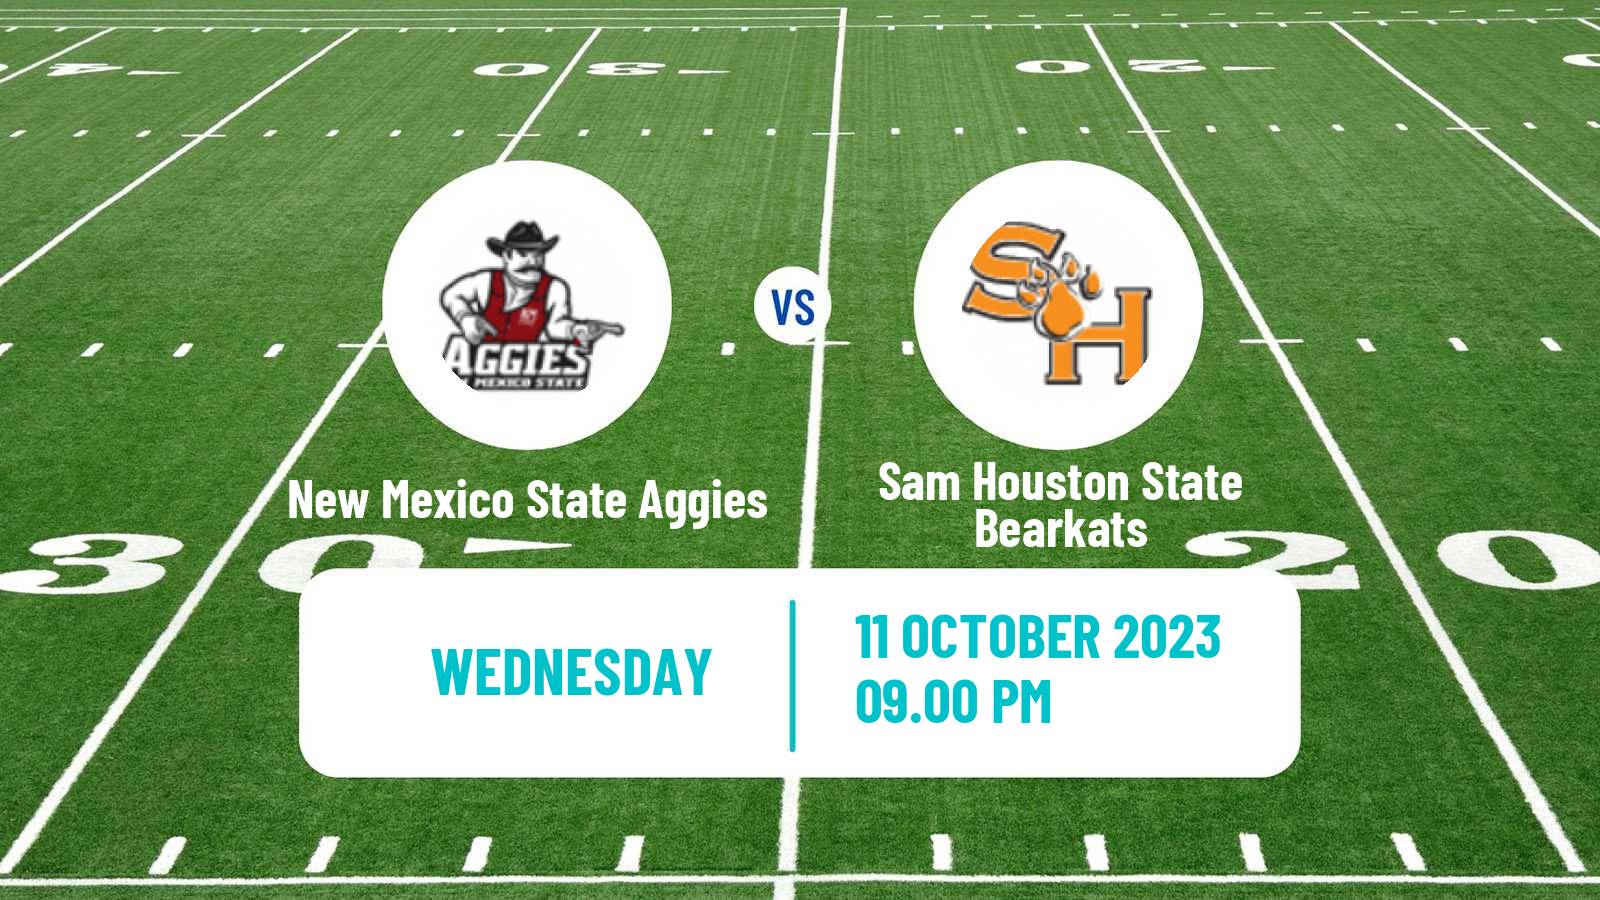 American football NCAA College Football New Mexico State Aggies - Sam Houston State Bearkats